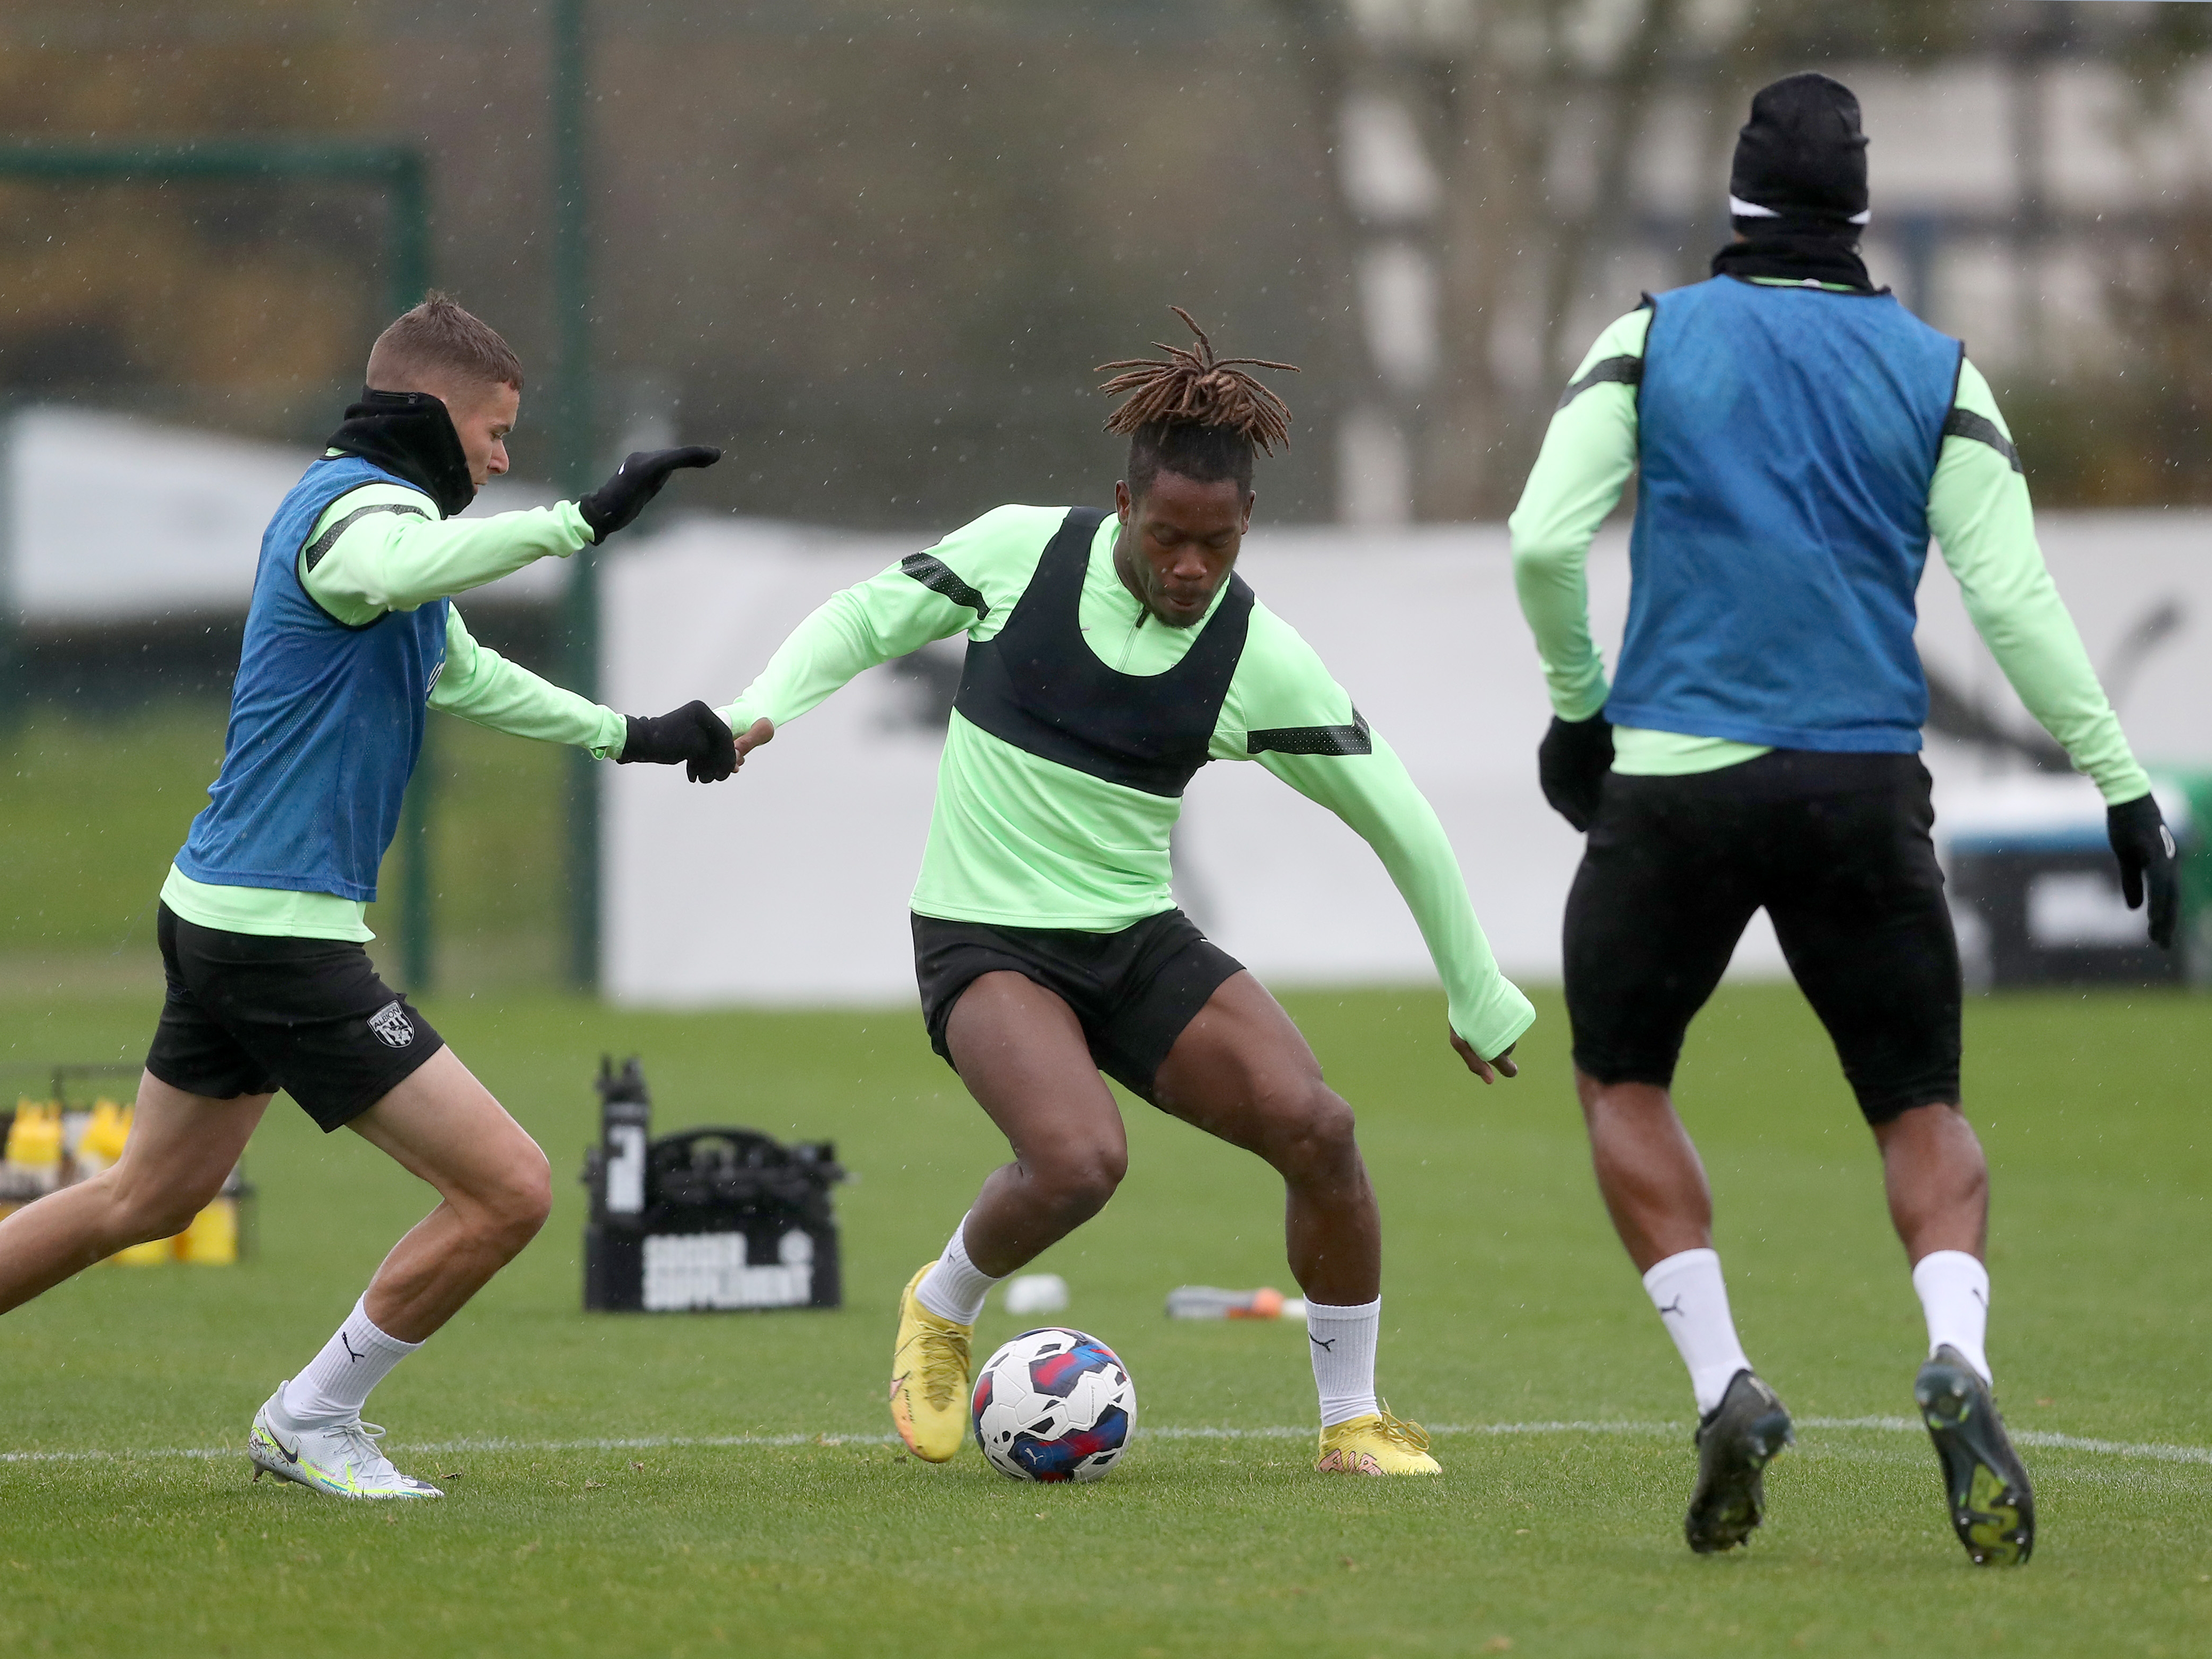 Albion players Brandon Thomas-Asante, Conor Townsend and Matty Phillips challenge for the ball at the club's training ground during the World Cup break